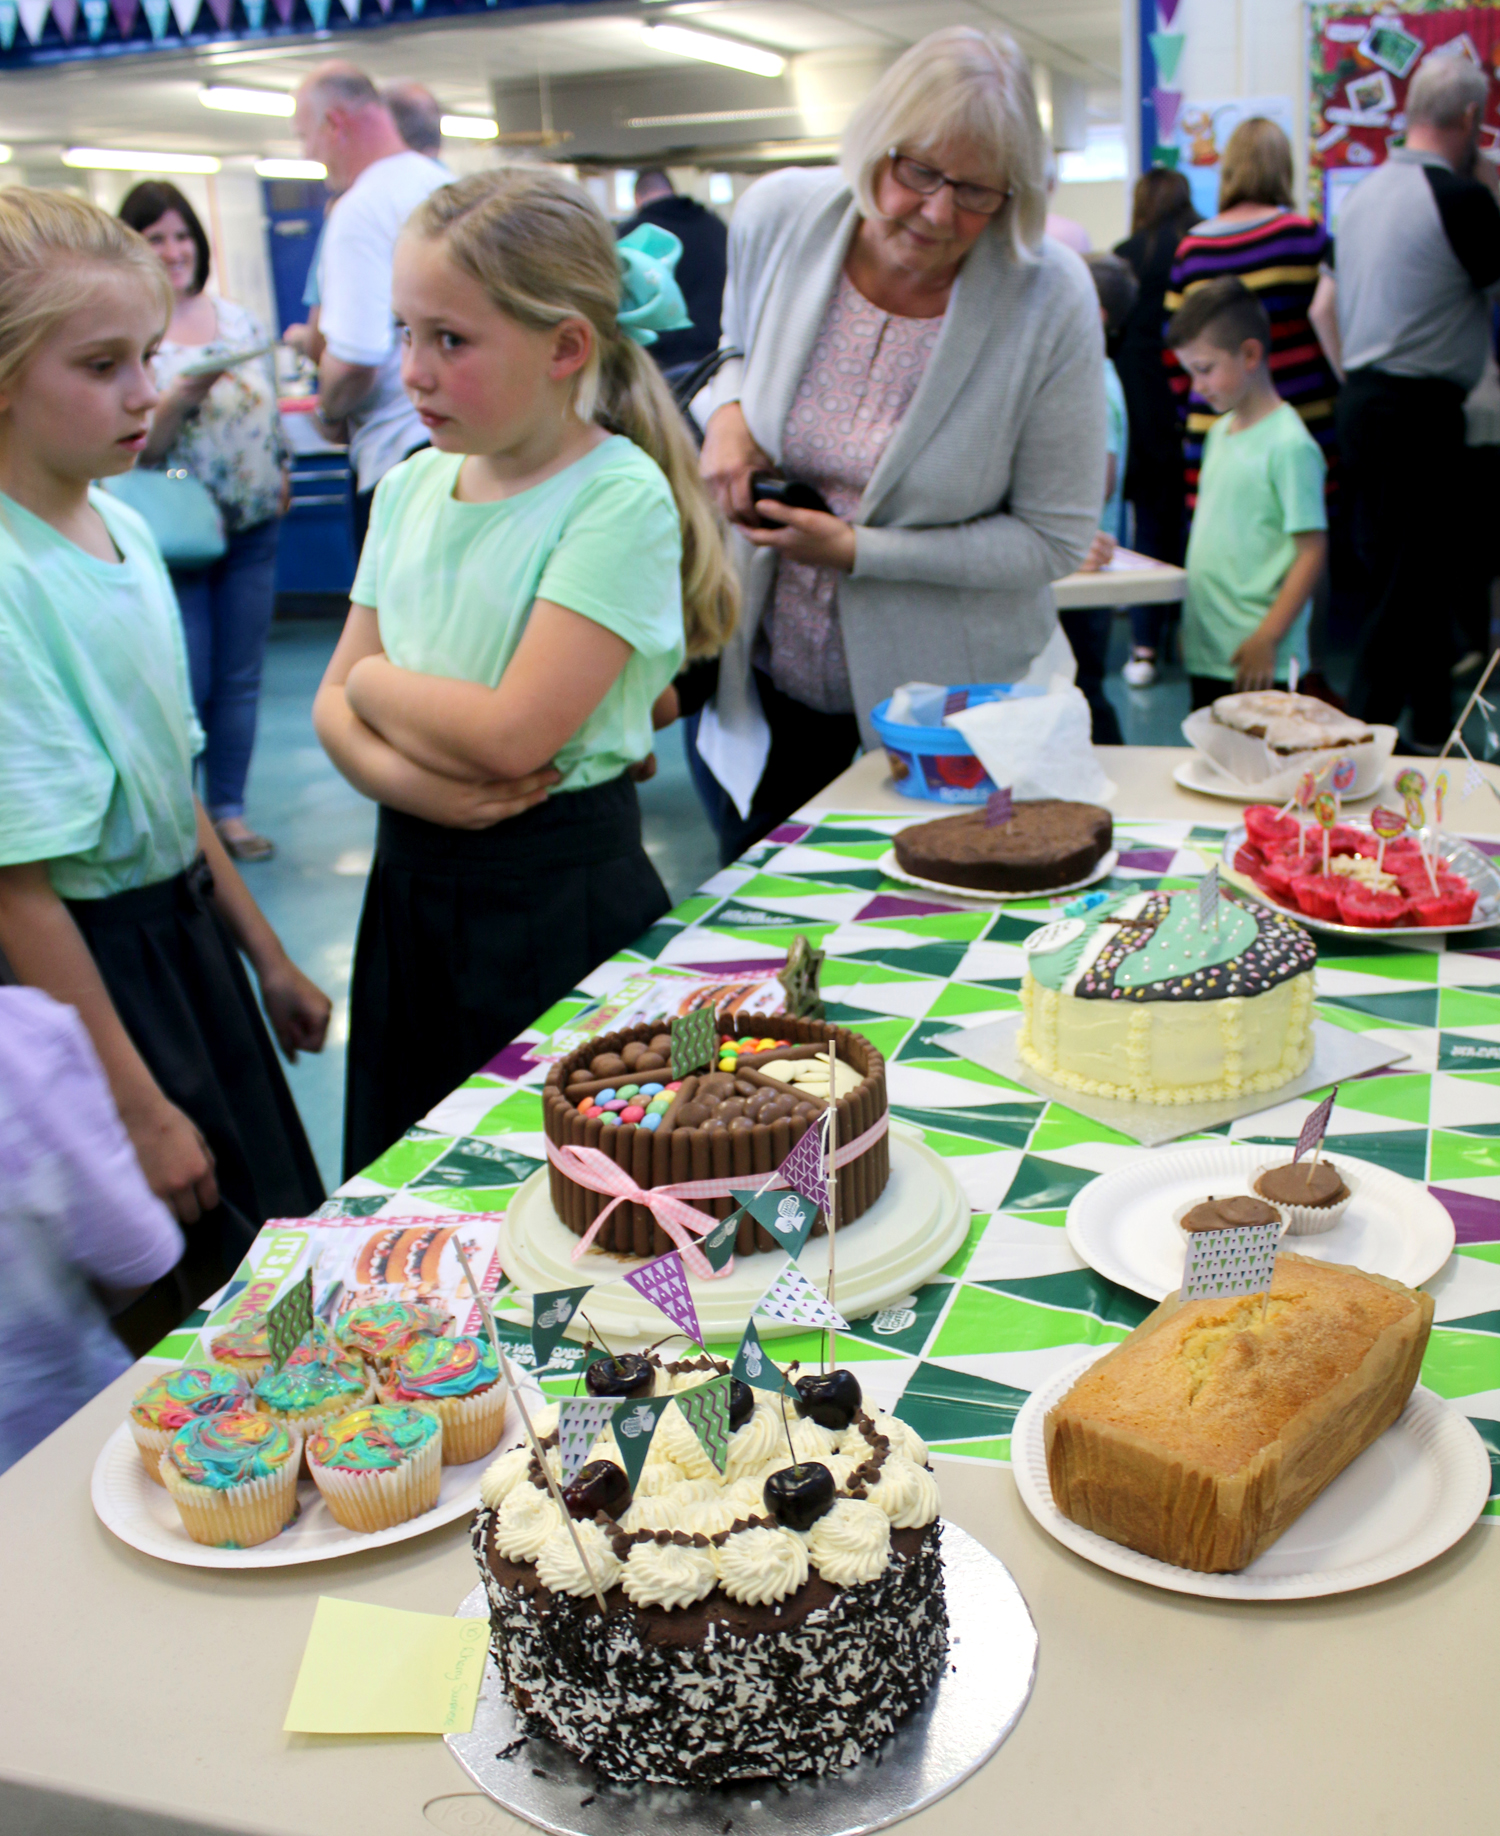 Byerley Park Charity Event Raised £484 for Macmillan